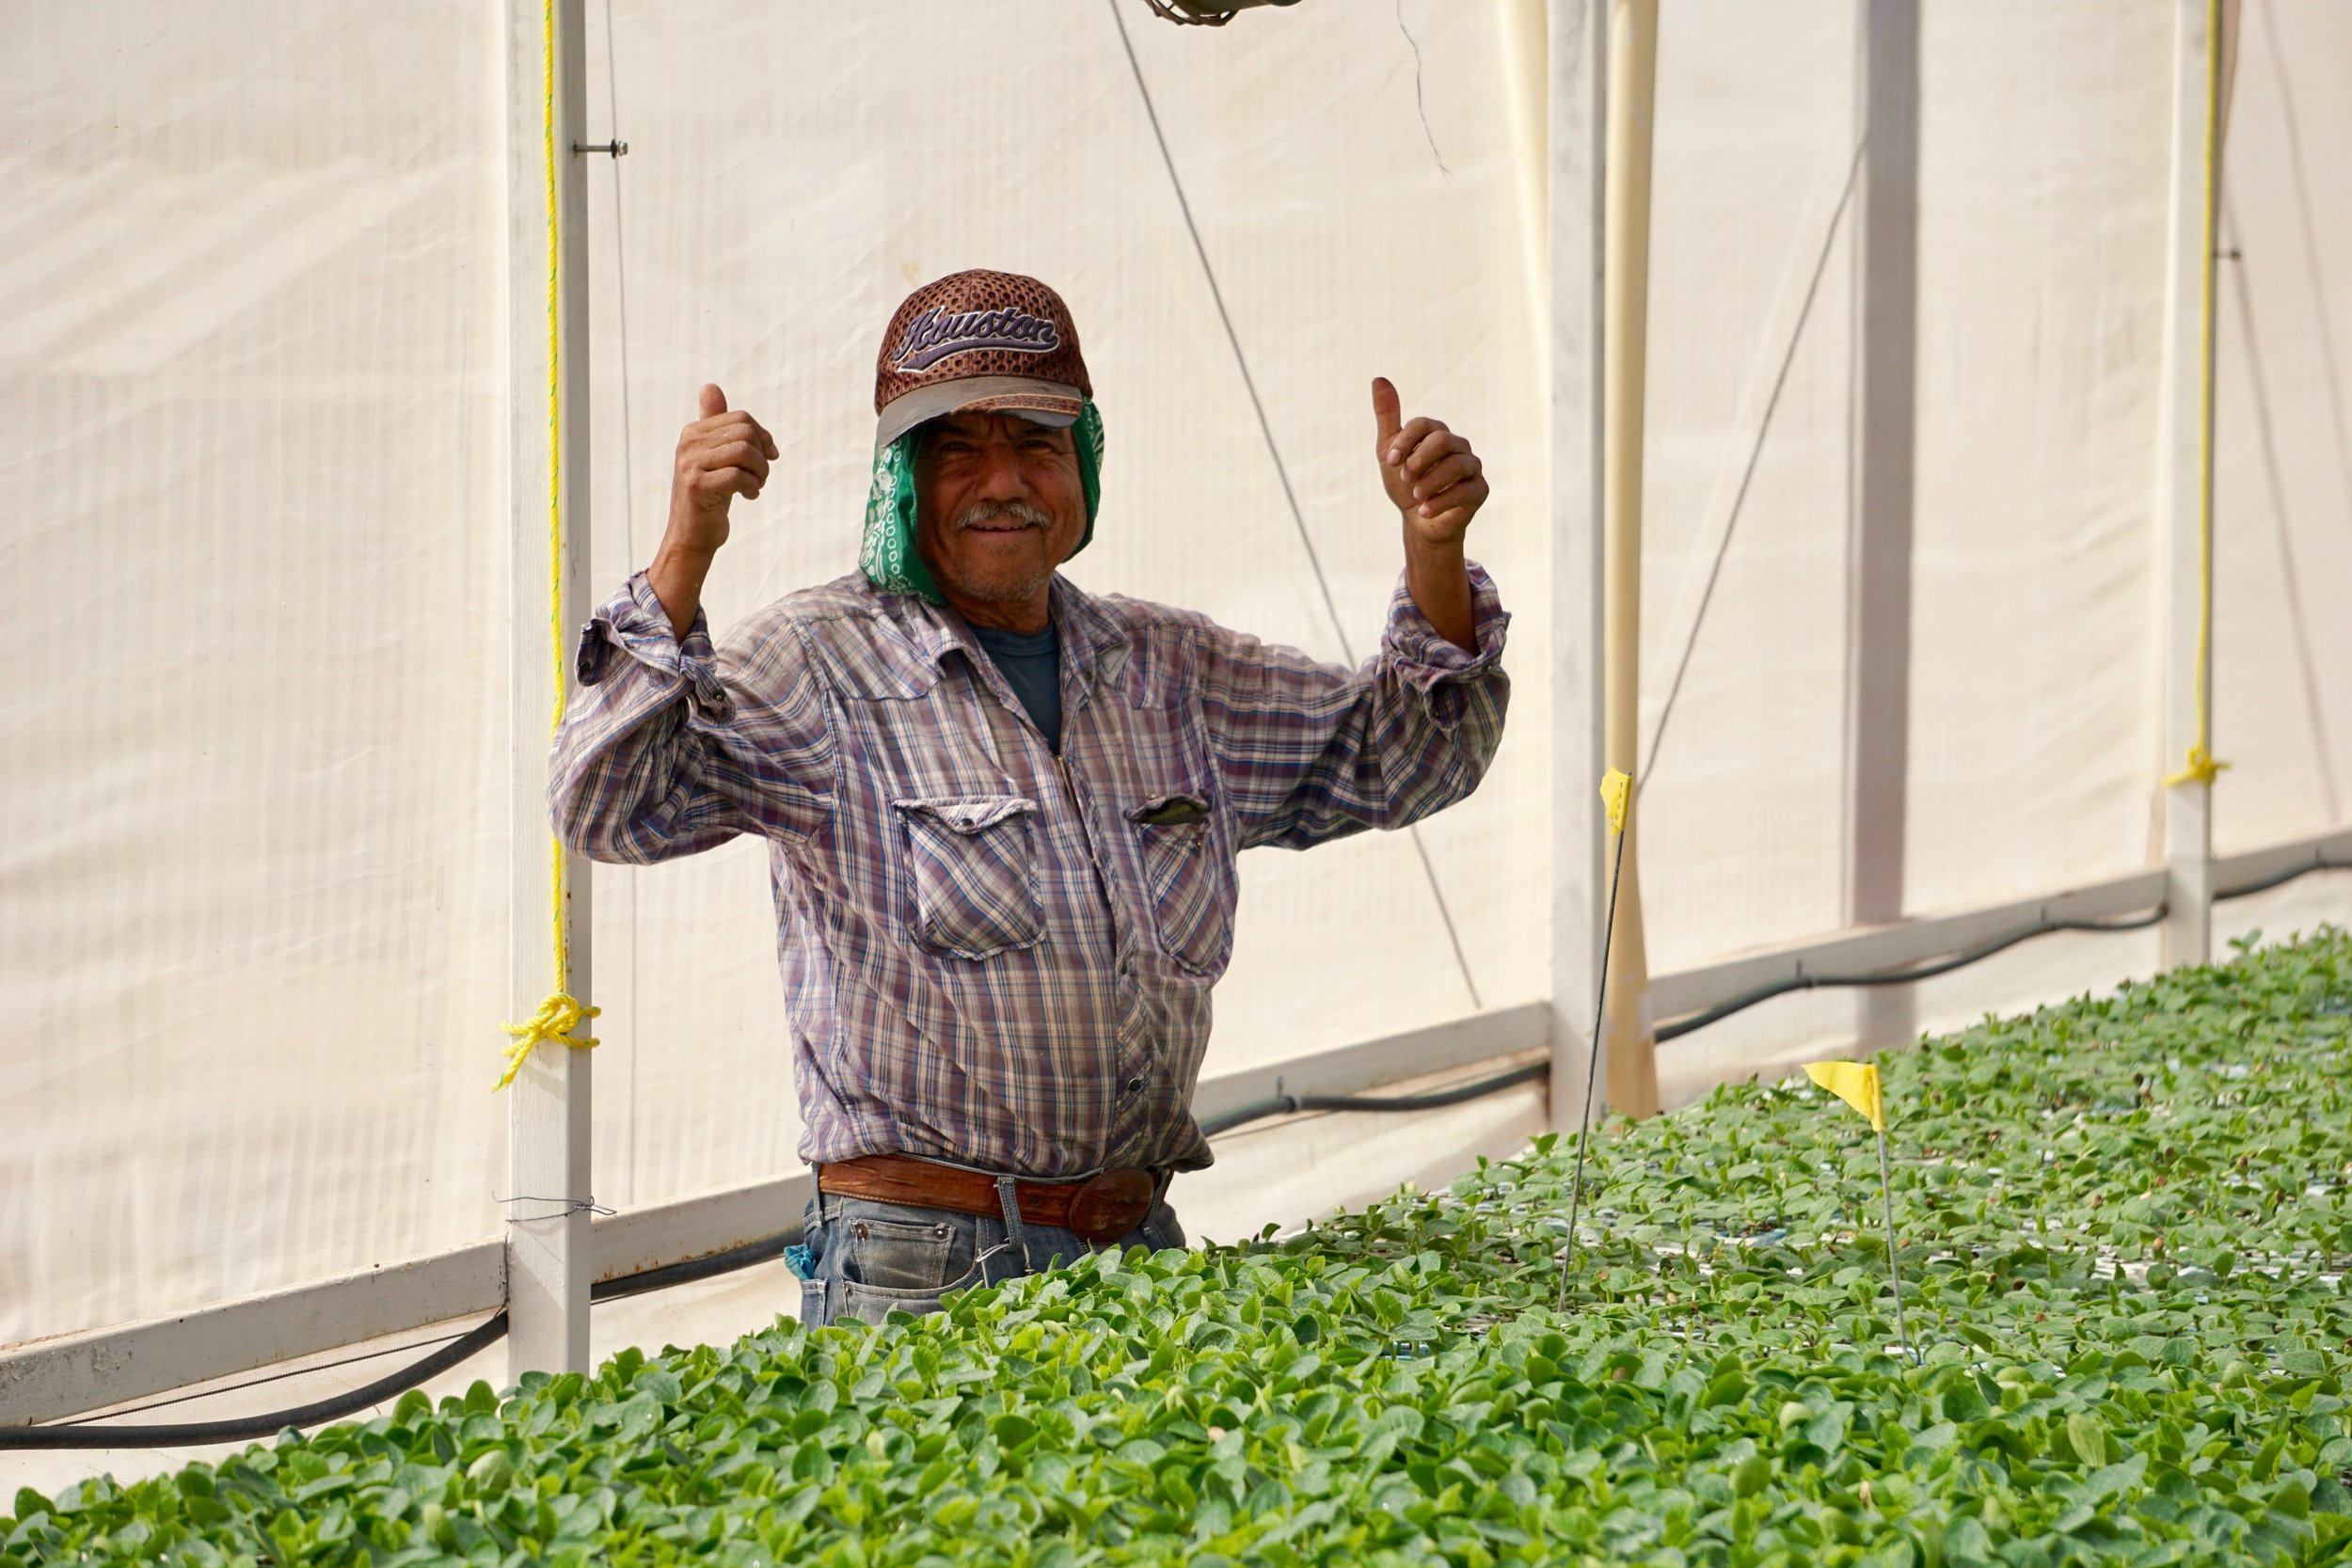 Covilli worker thumbs up in green house.jpg